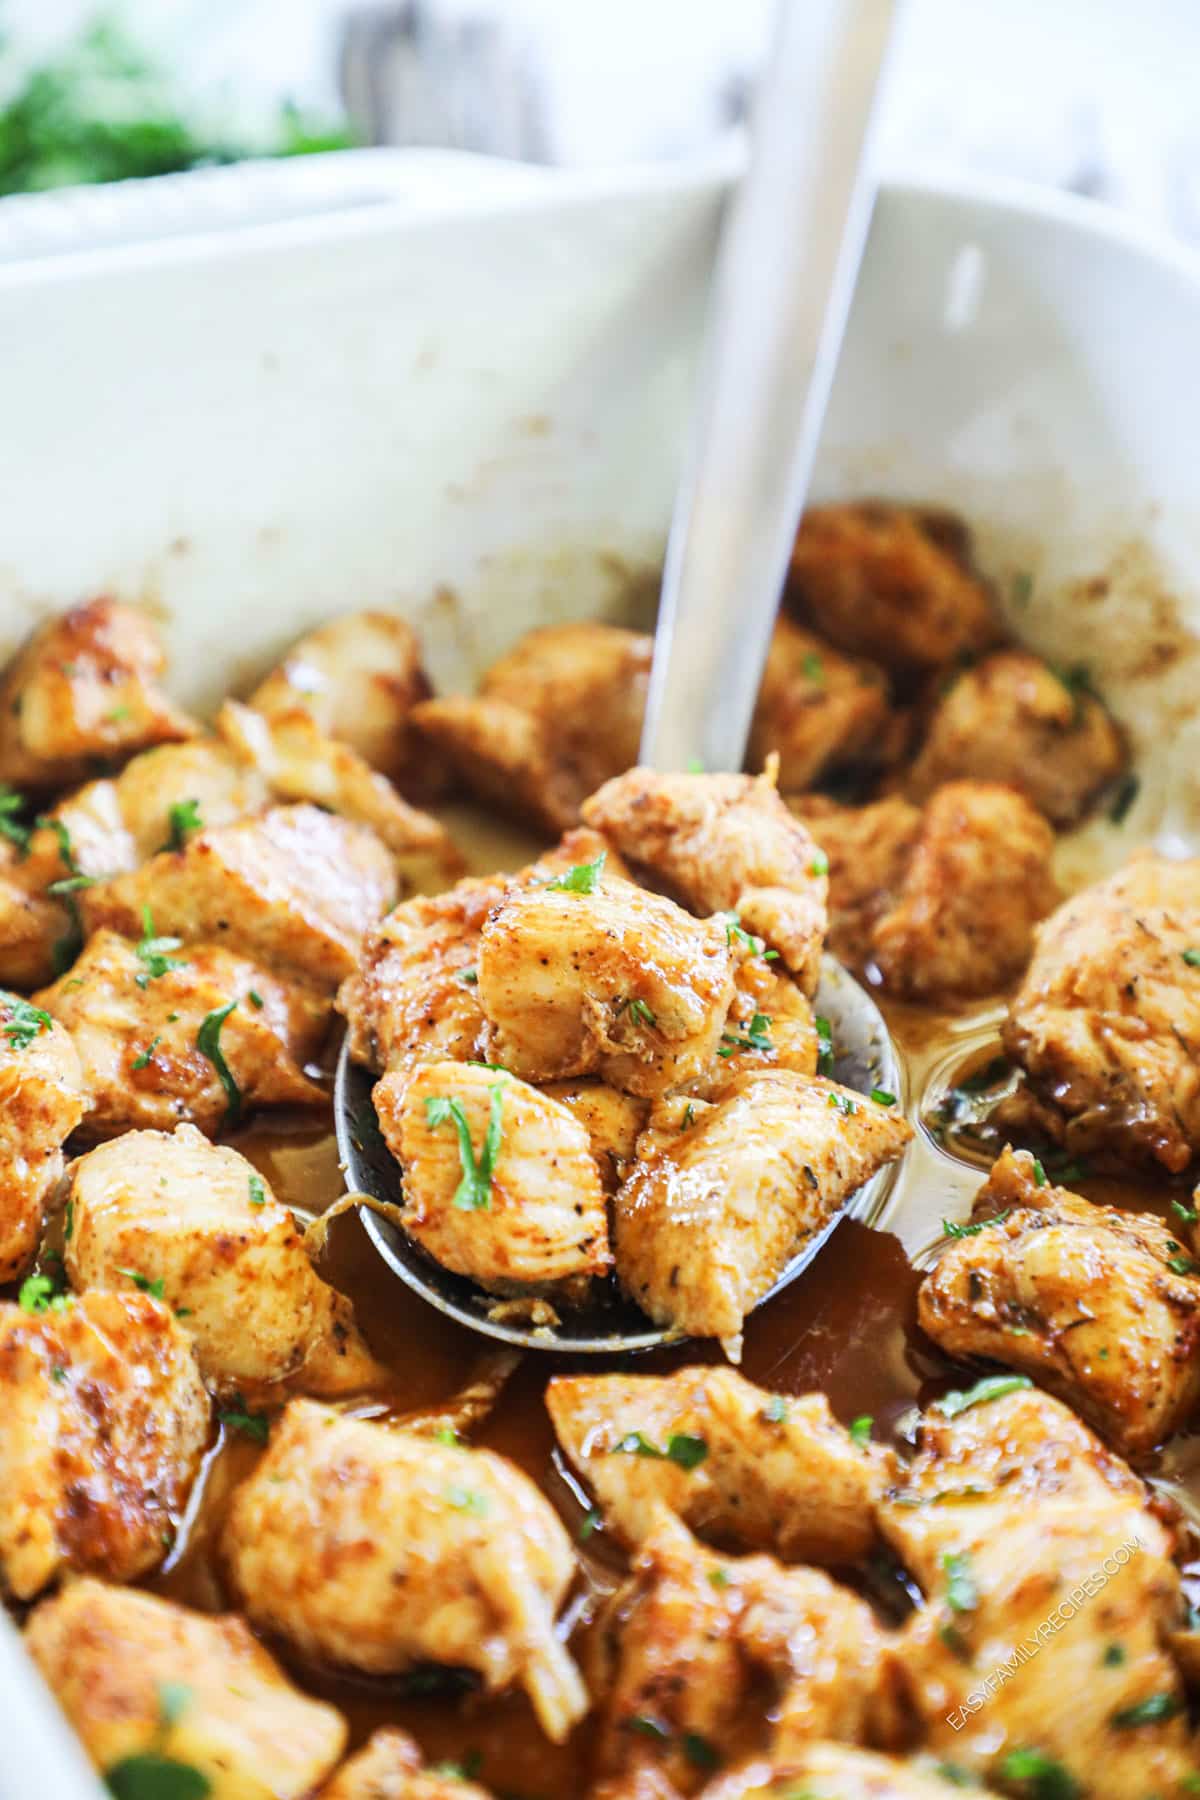 Spoon lifting chicken bites from baking dish